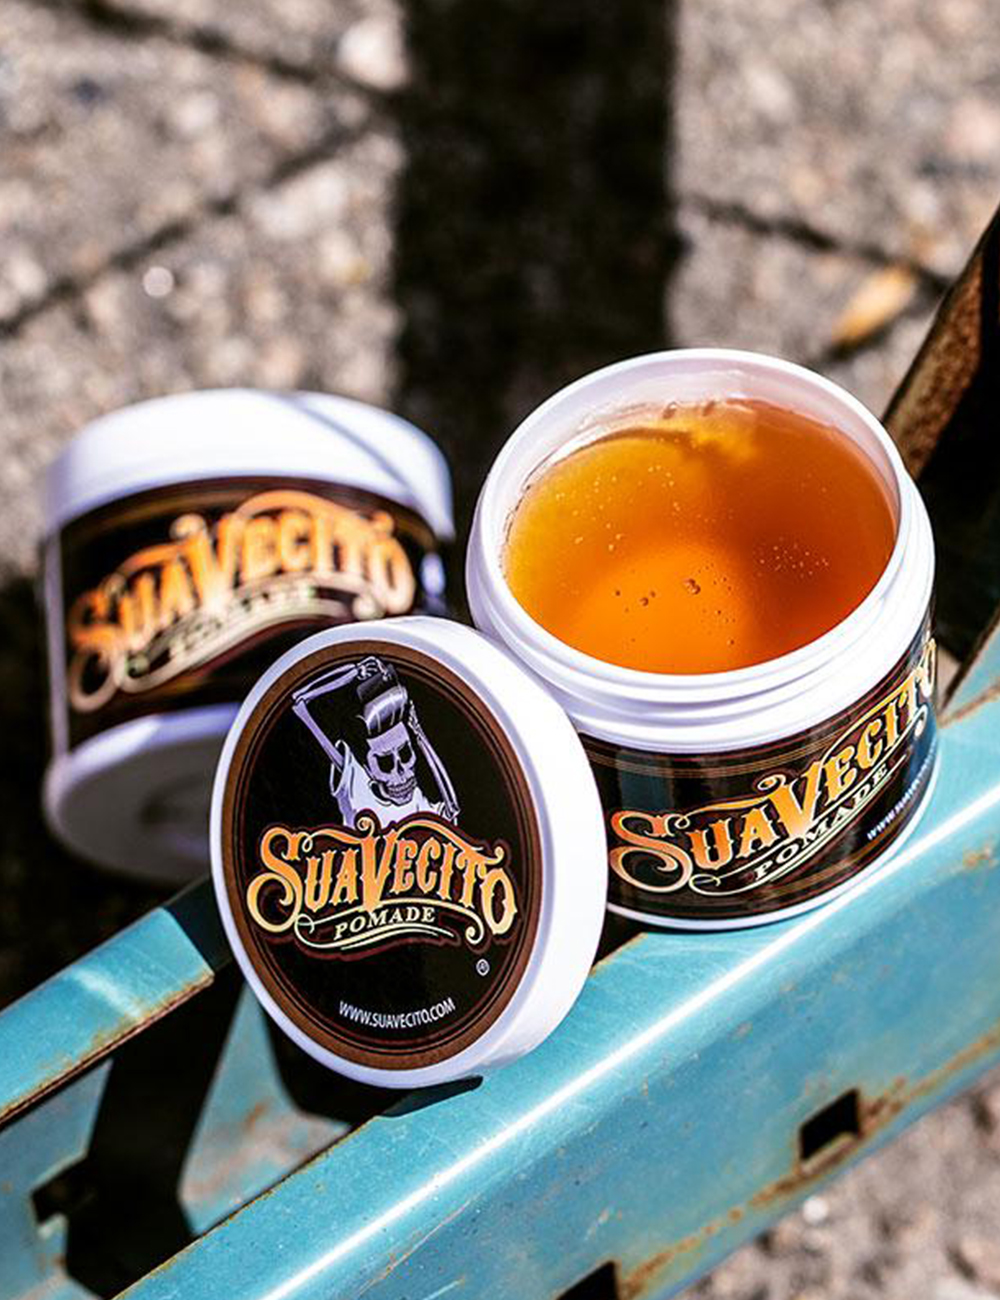 Suavecito Original Hold Pomade 4oz - Hair Styling Products - Slick Styles